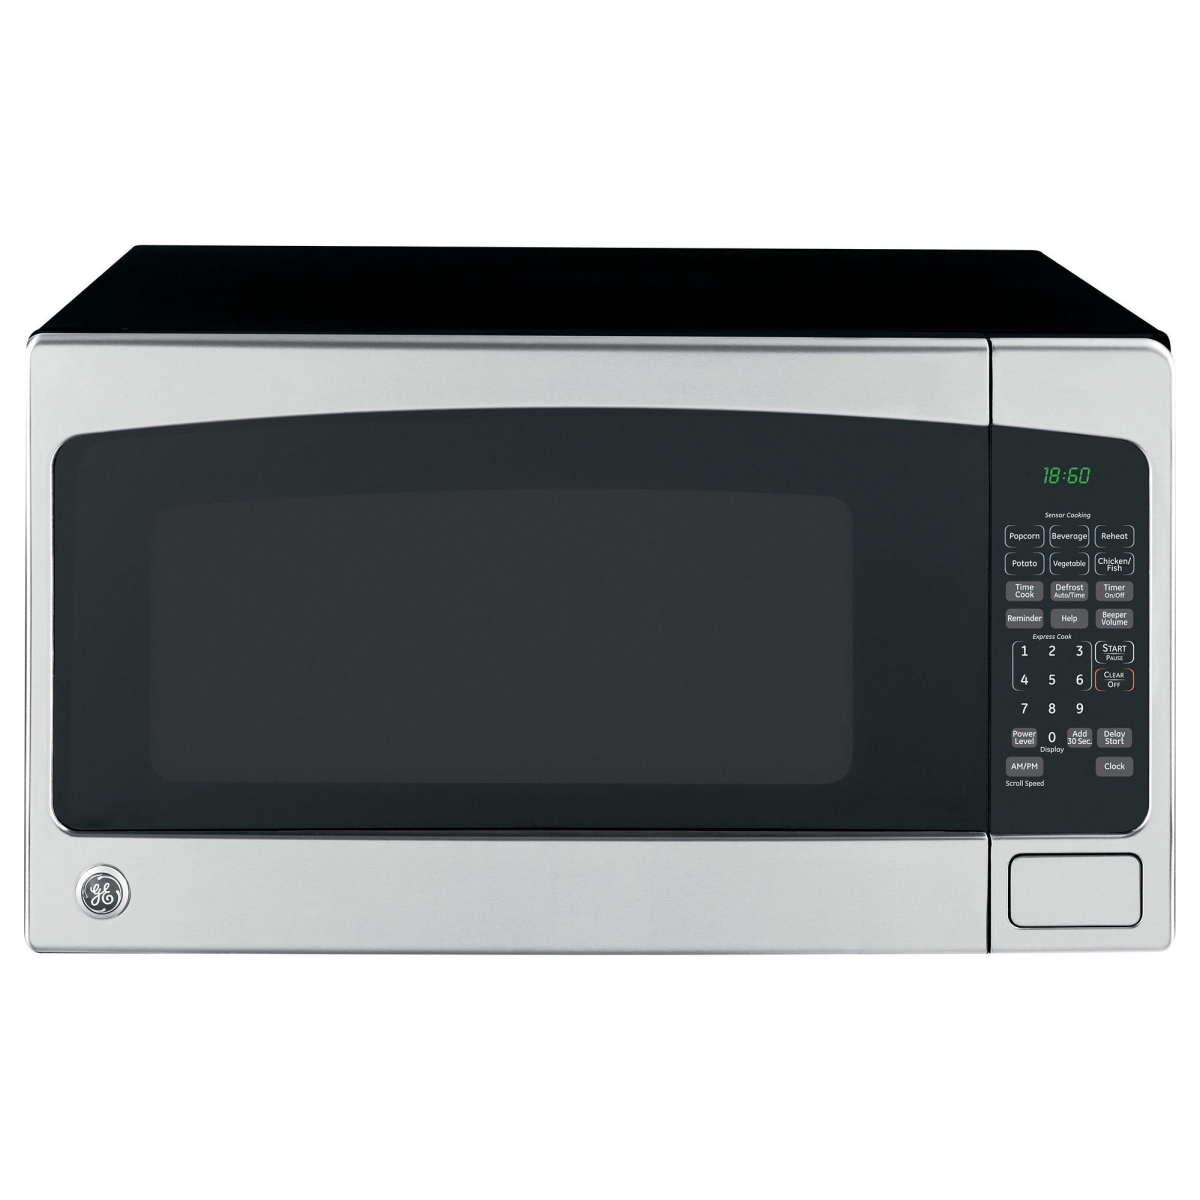 260832 2.0 Cu. Ft. Stainless Steel Microwave